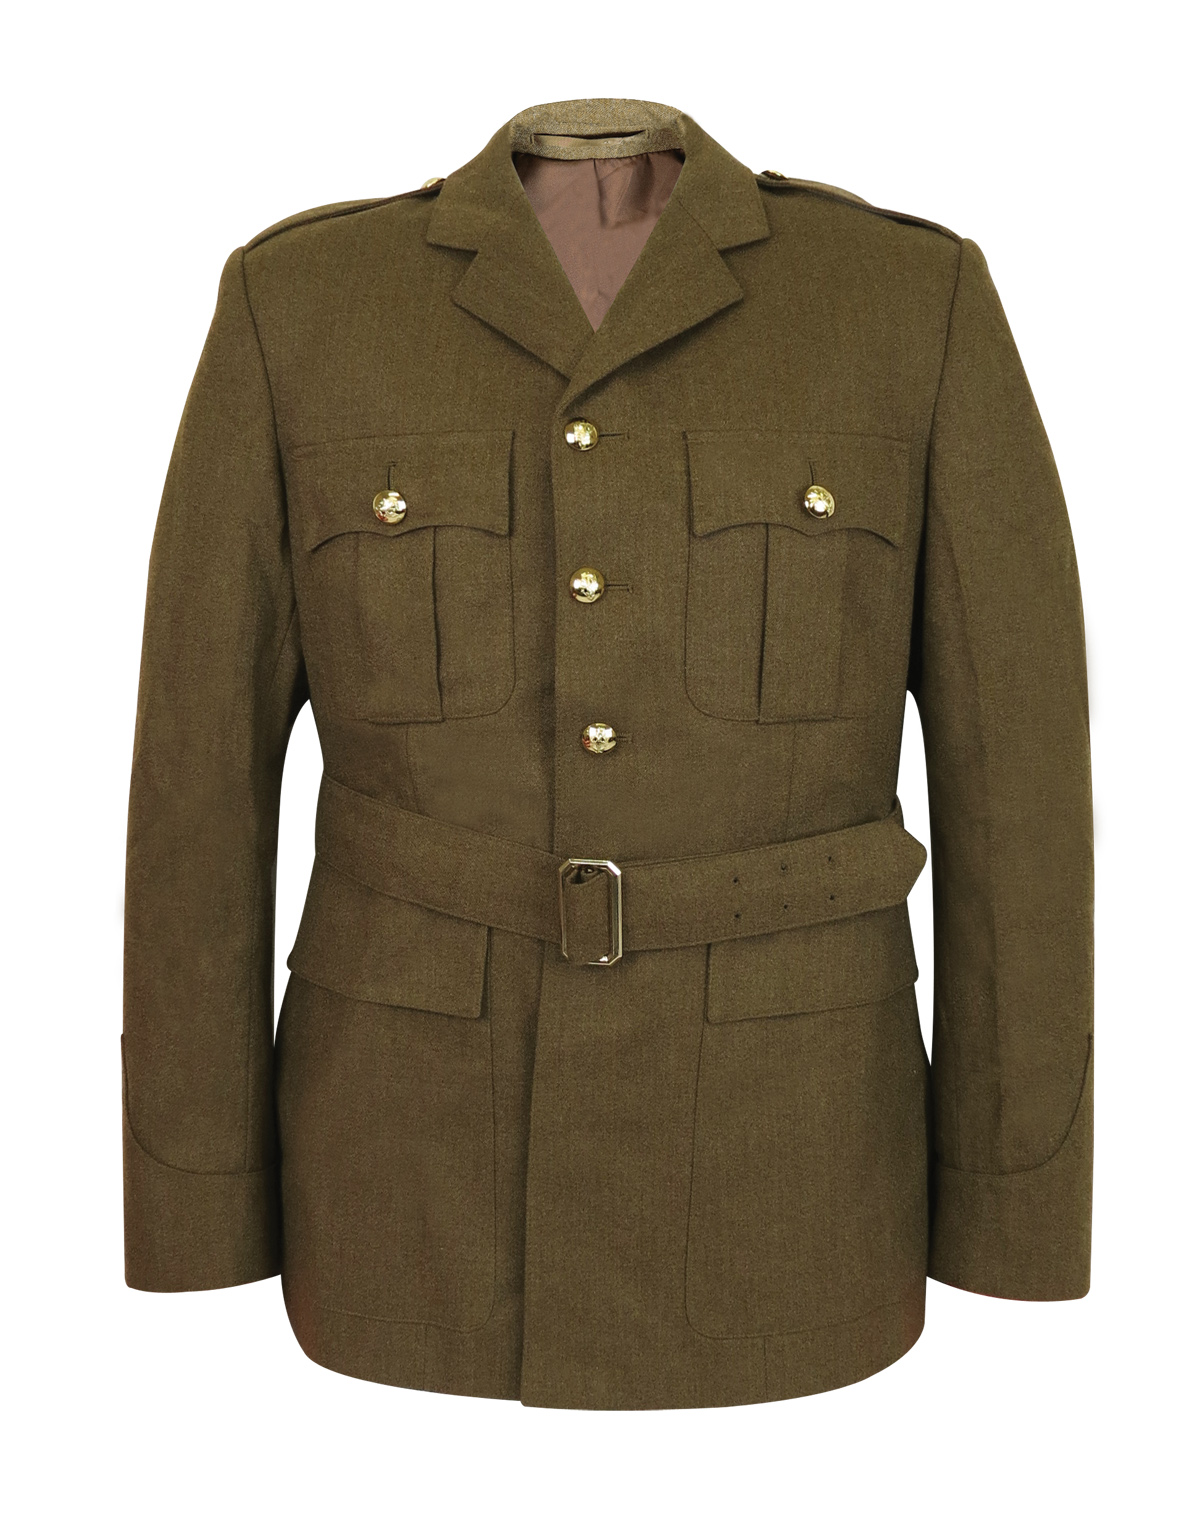 Tunic All Sizes No buttons NEW Genuine British Army FAD  No2 Dress Jacket 